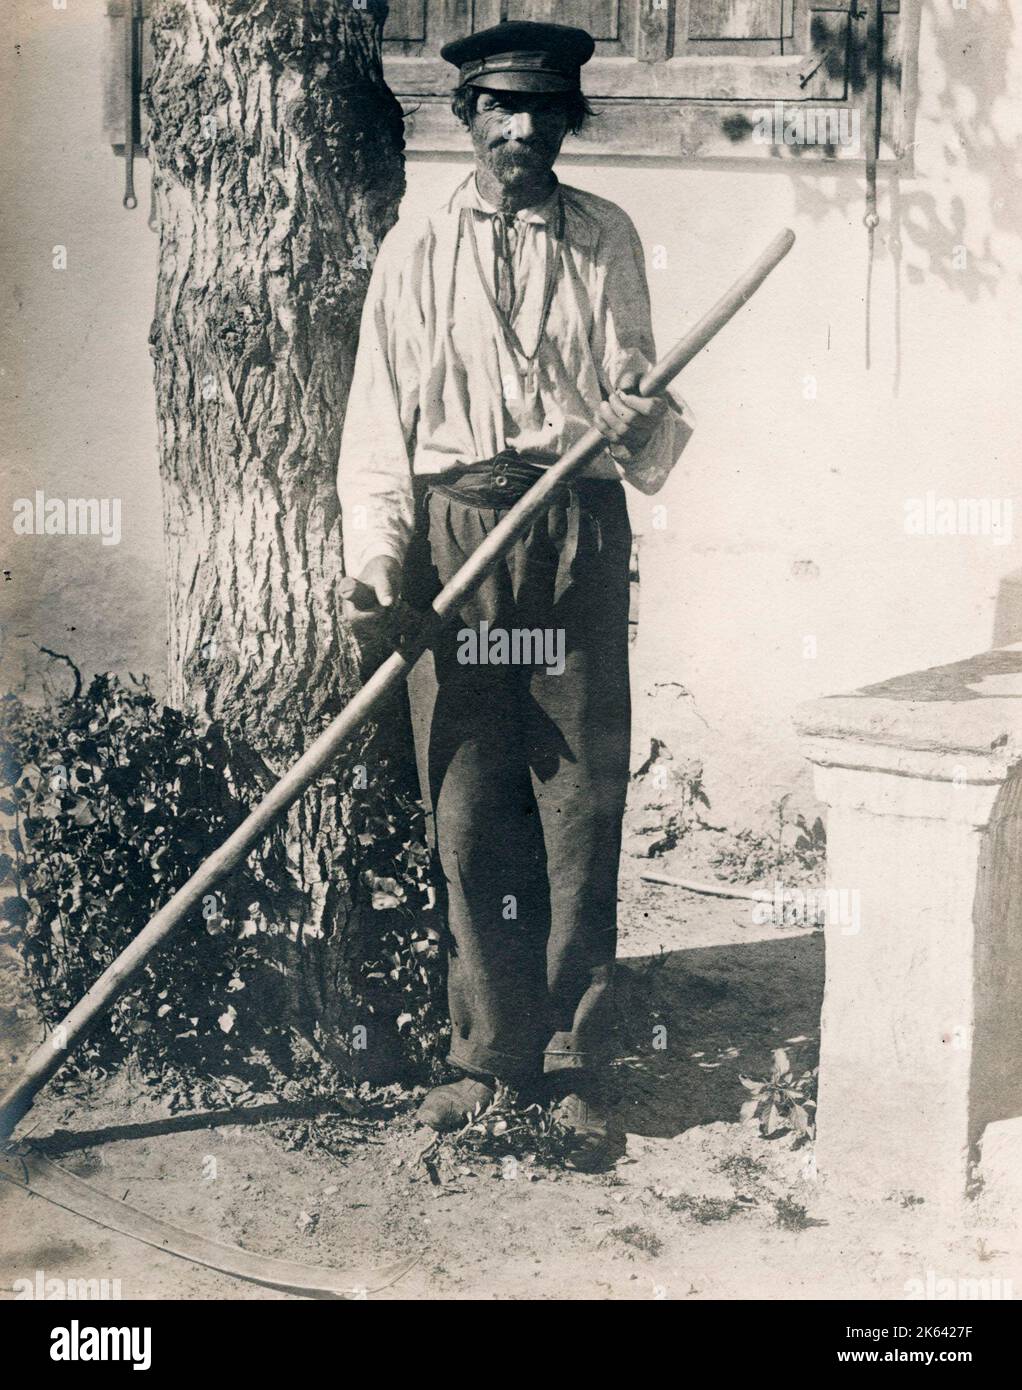 Caucasus Georgia Kislovodsk - an old soldier. Vintage 19th century photograph. Stock Photo